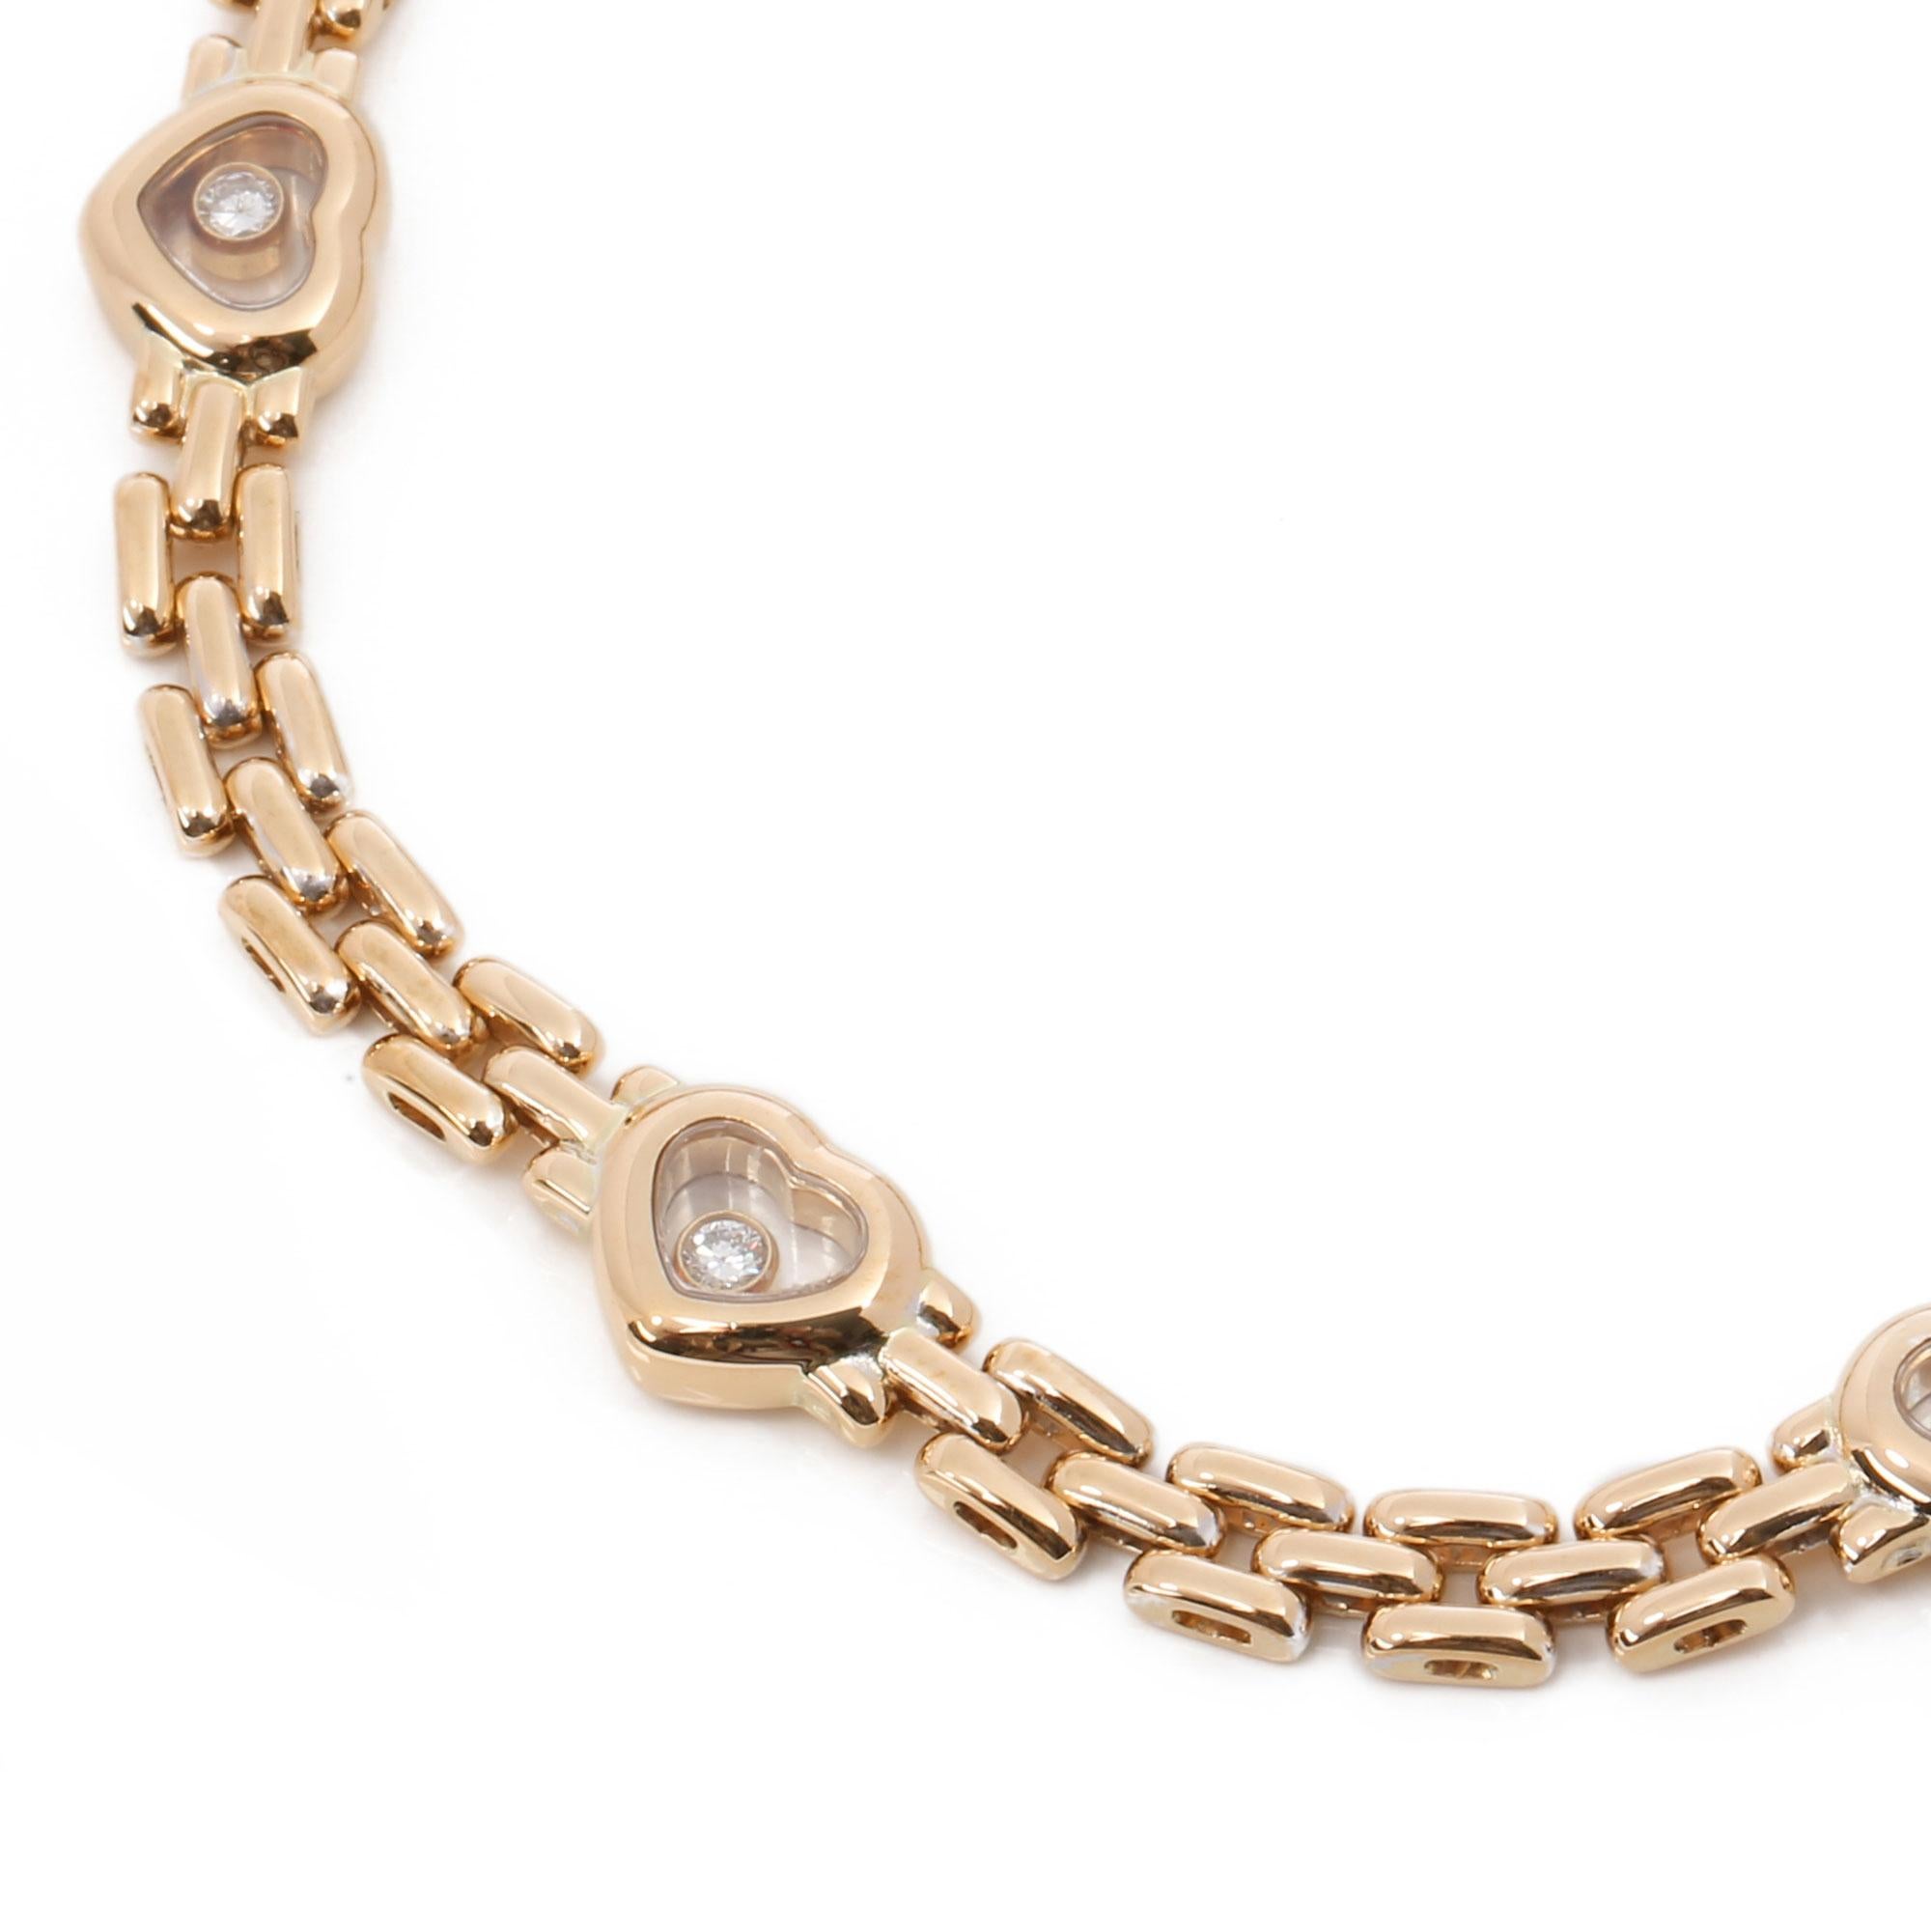 This bracelet by Chopard is from their Happy Hearts collection and features 5 floating diamonds within sapphire crystals, made in 18ct yellow gold. This bracelet has a secure push over clasp. Accompanied with a Xupes presentation box. Our Xupes